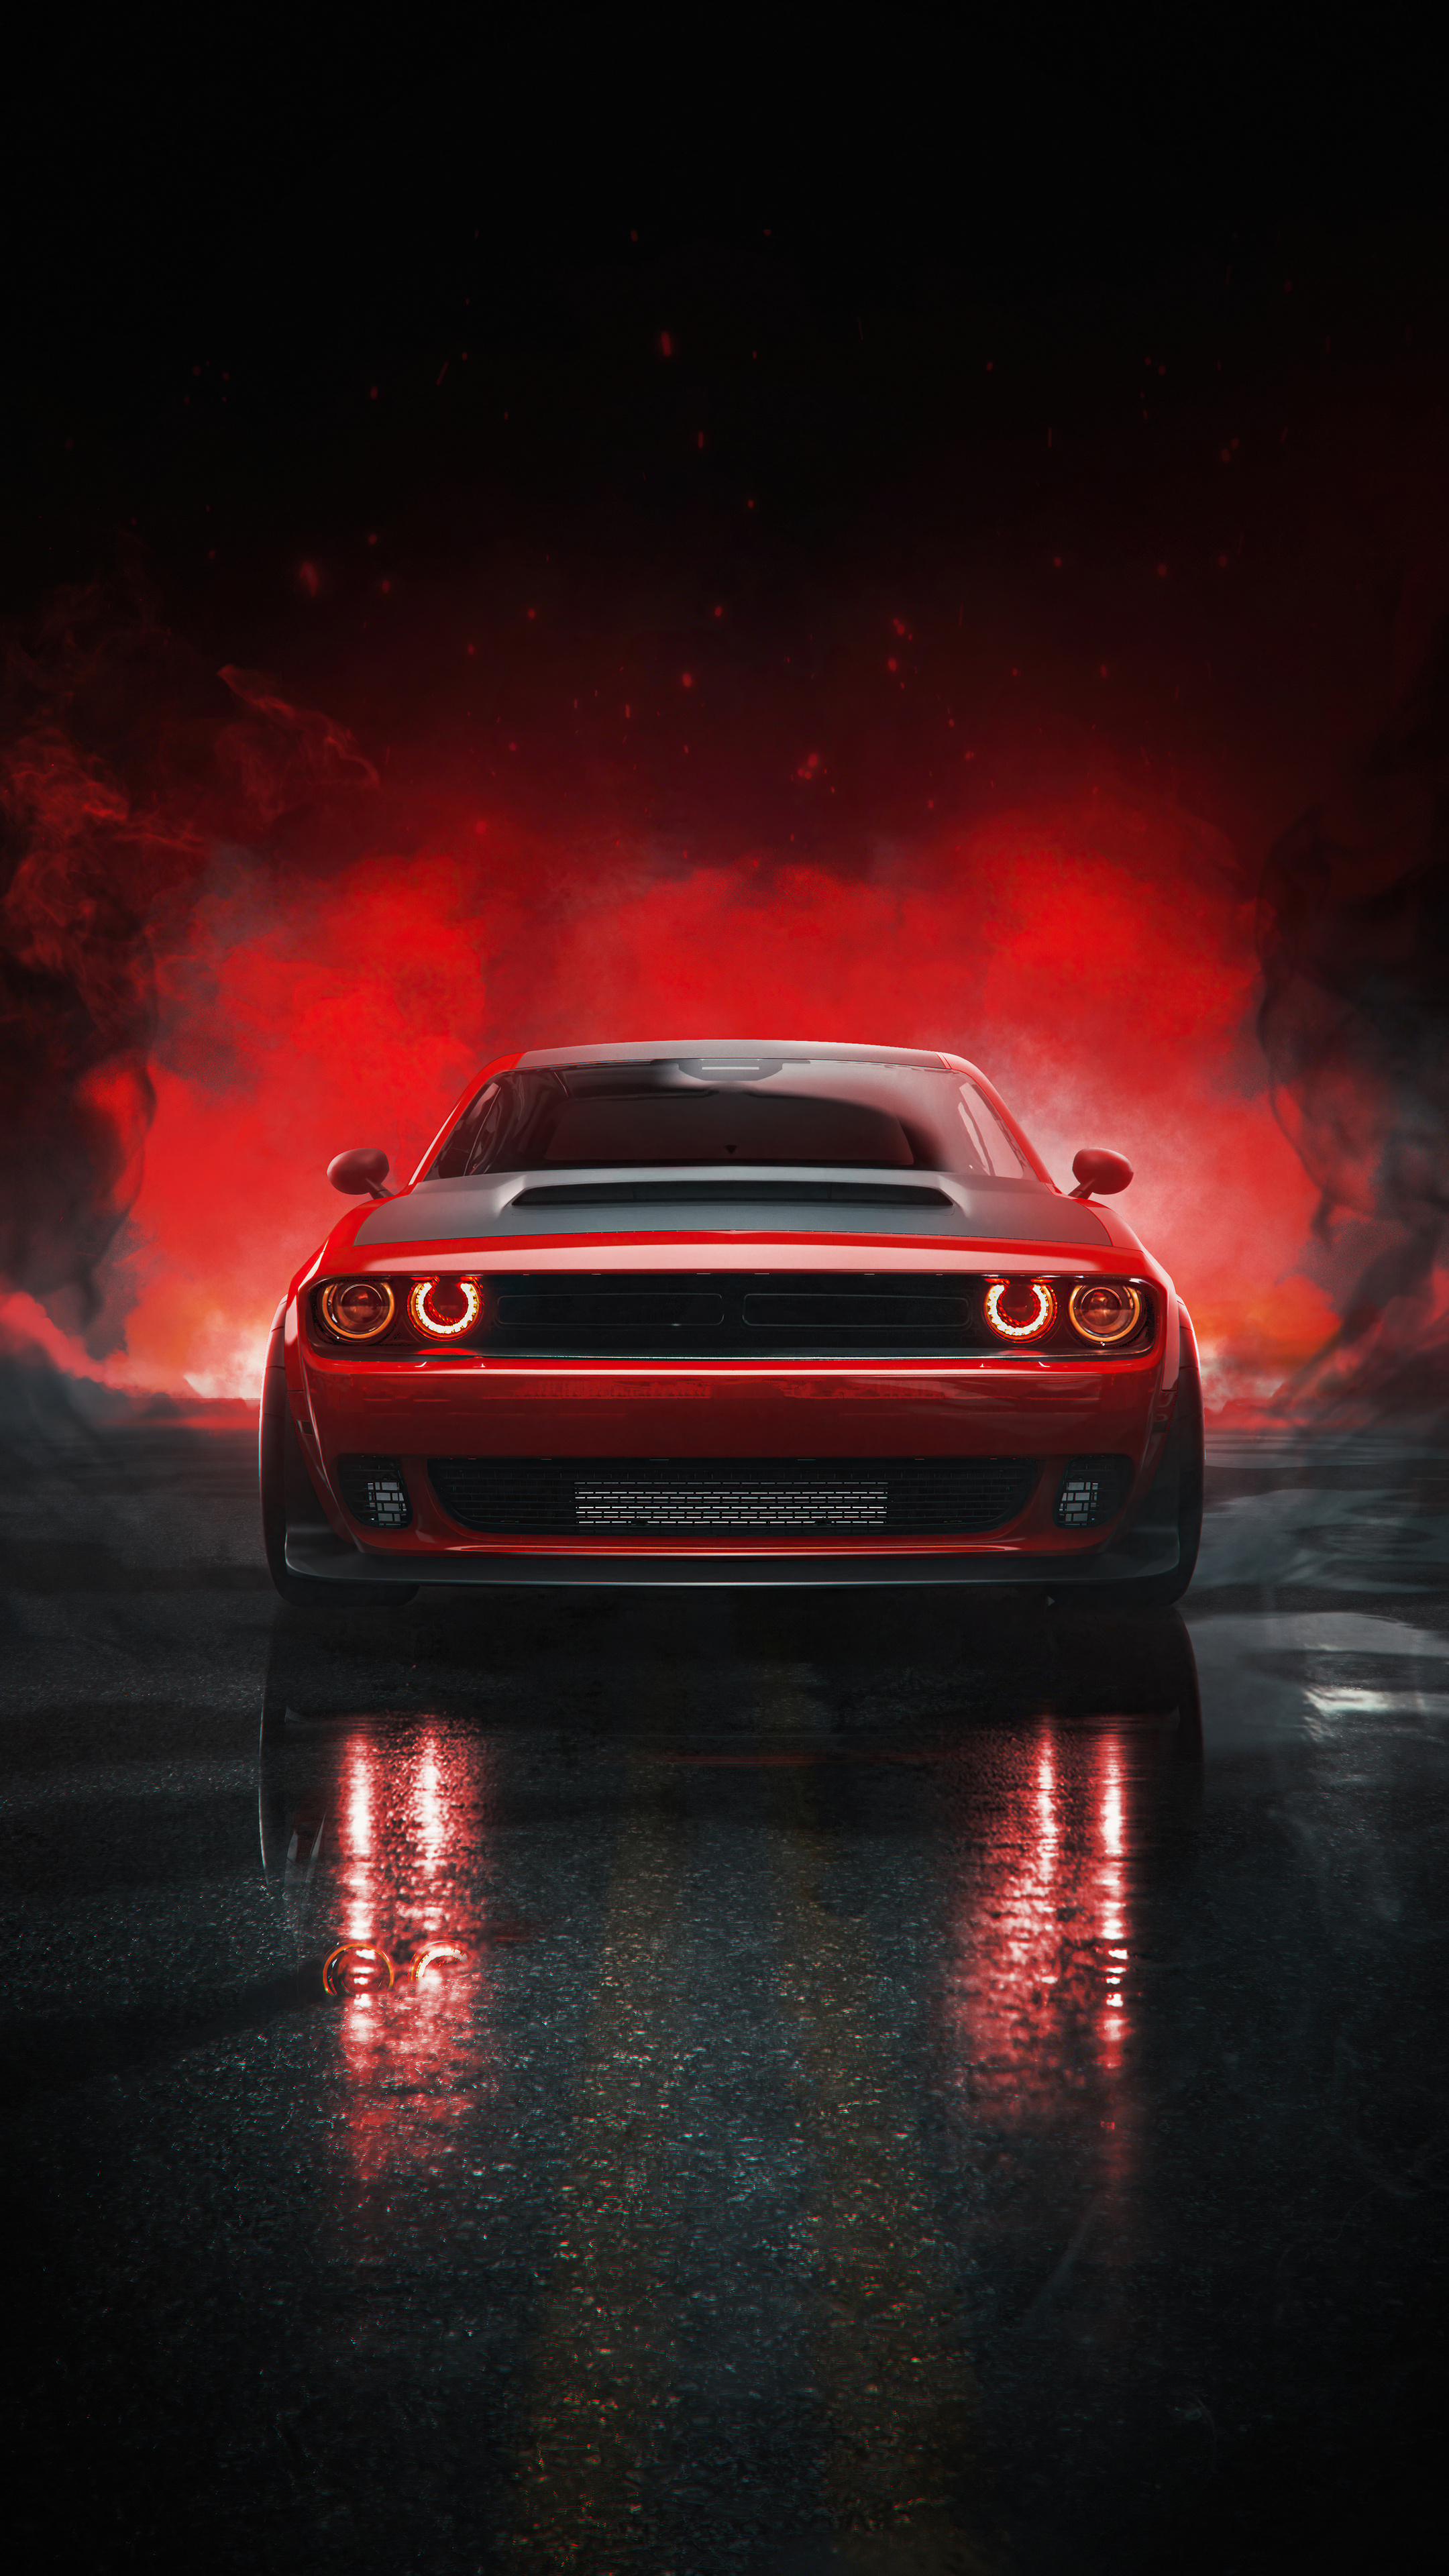 Dodge Challenger, Muscle car, 2021 model, Sony Xperia, 2160x3840 4K Handy